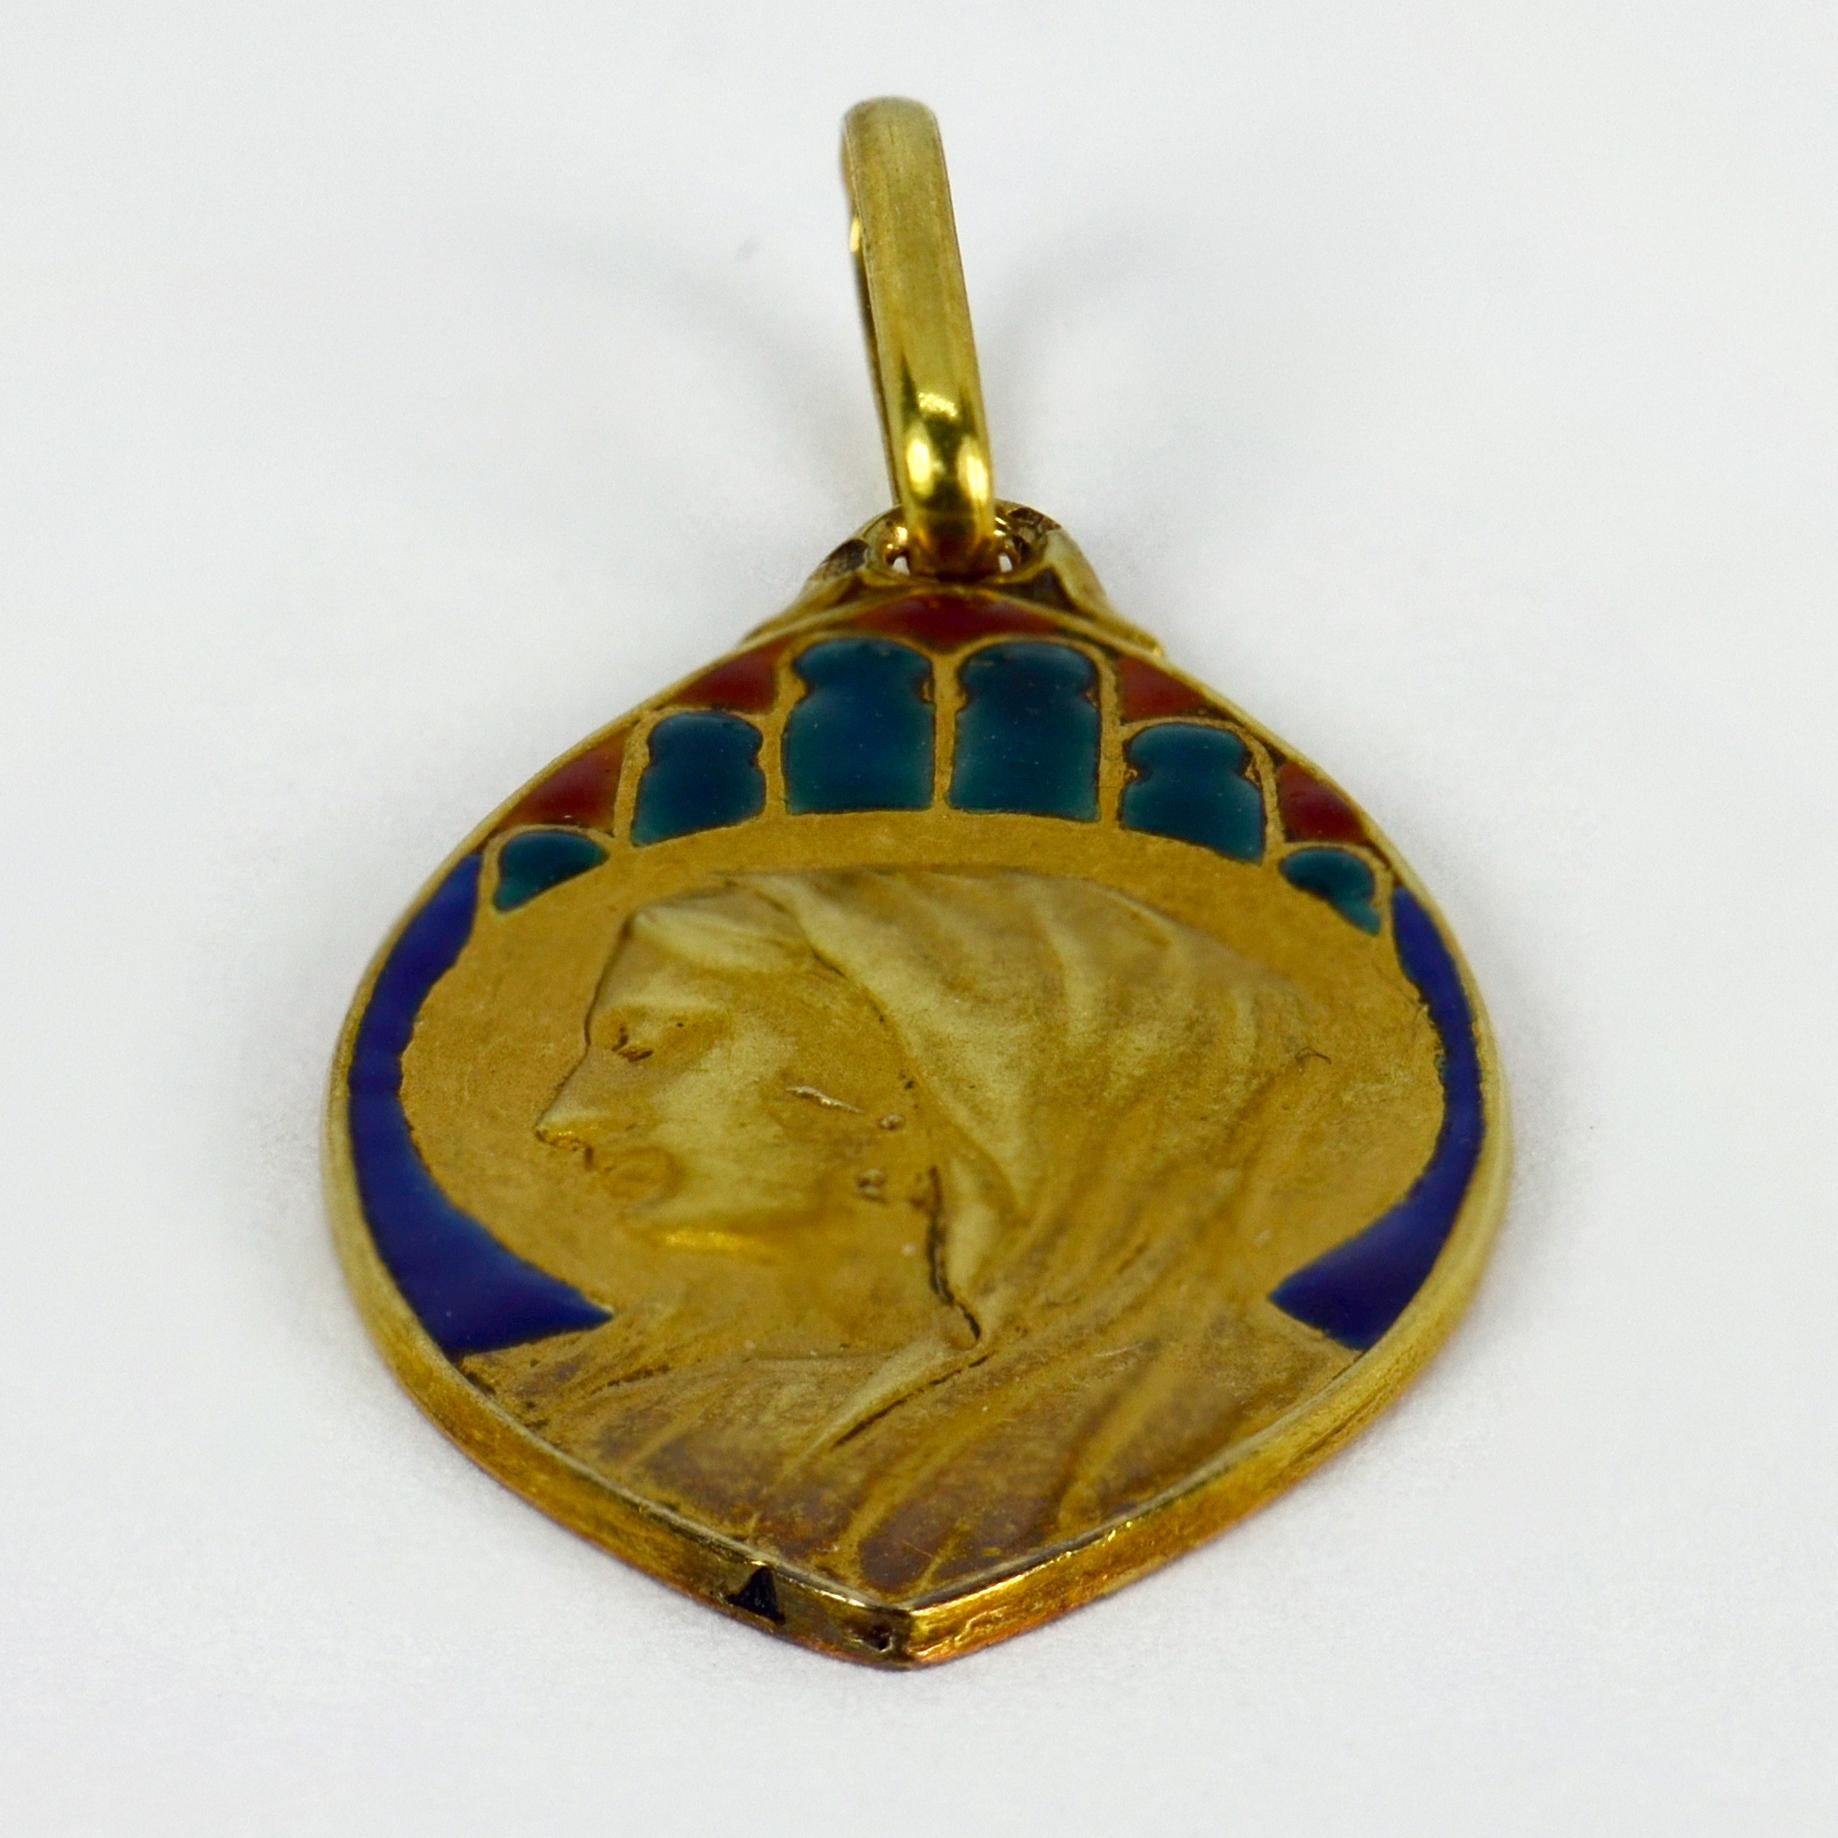 A French 18 karat (18K) yellow gold charm pendant designed as a navette shaped medal depicting the Virgin Mary to an enamel ground resembling a stained glass window. Stamped with the eagle’s head for 18 karat gold and French